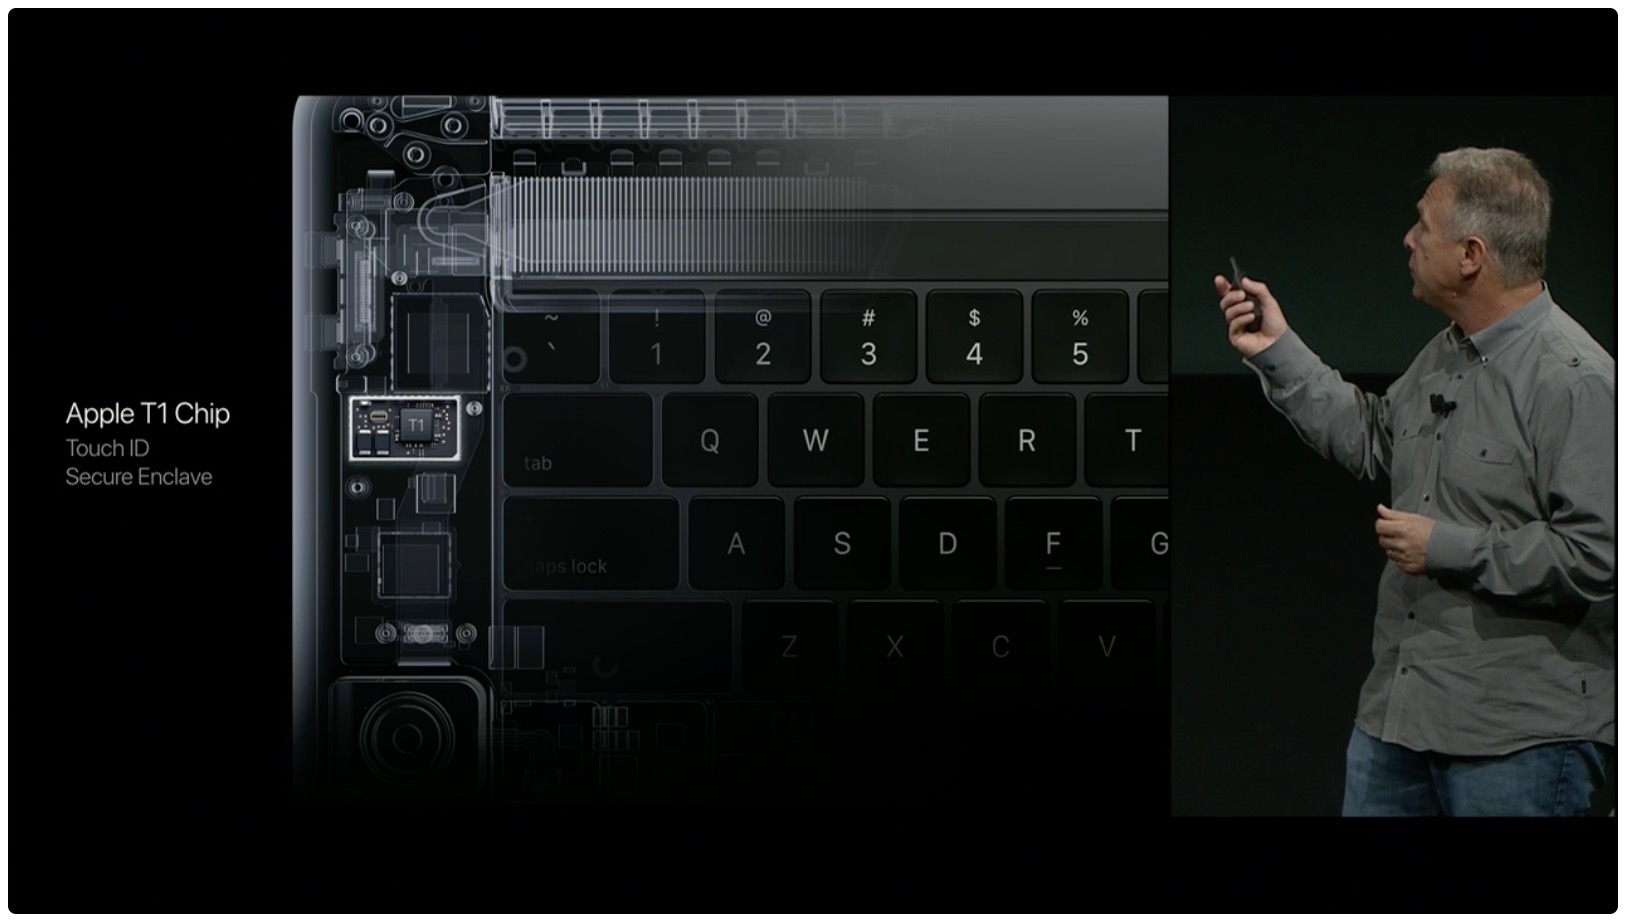 Phil Schiller presenting the Apple T1 Chip on a MacBook